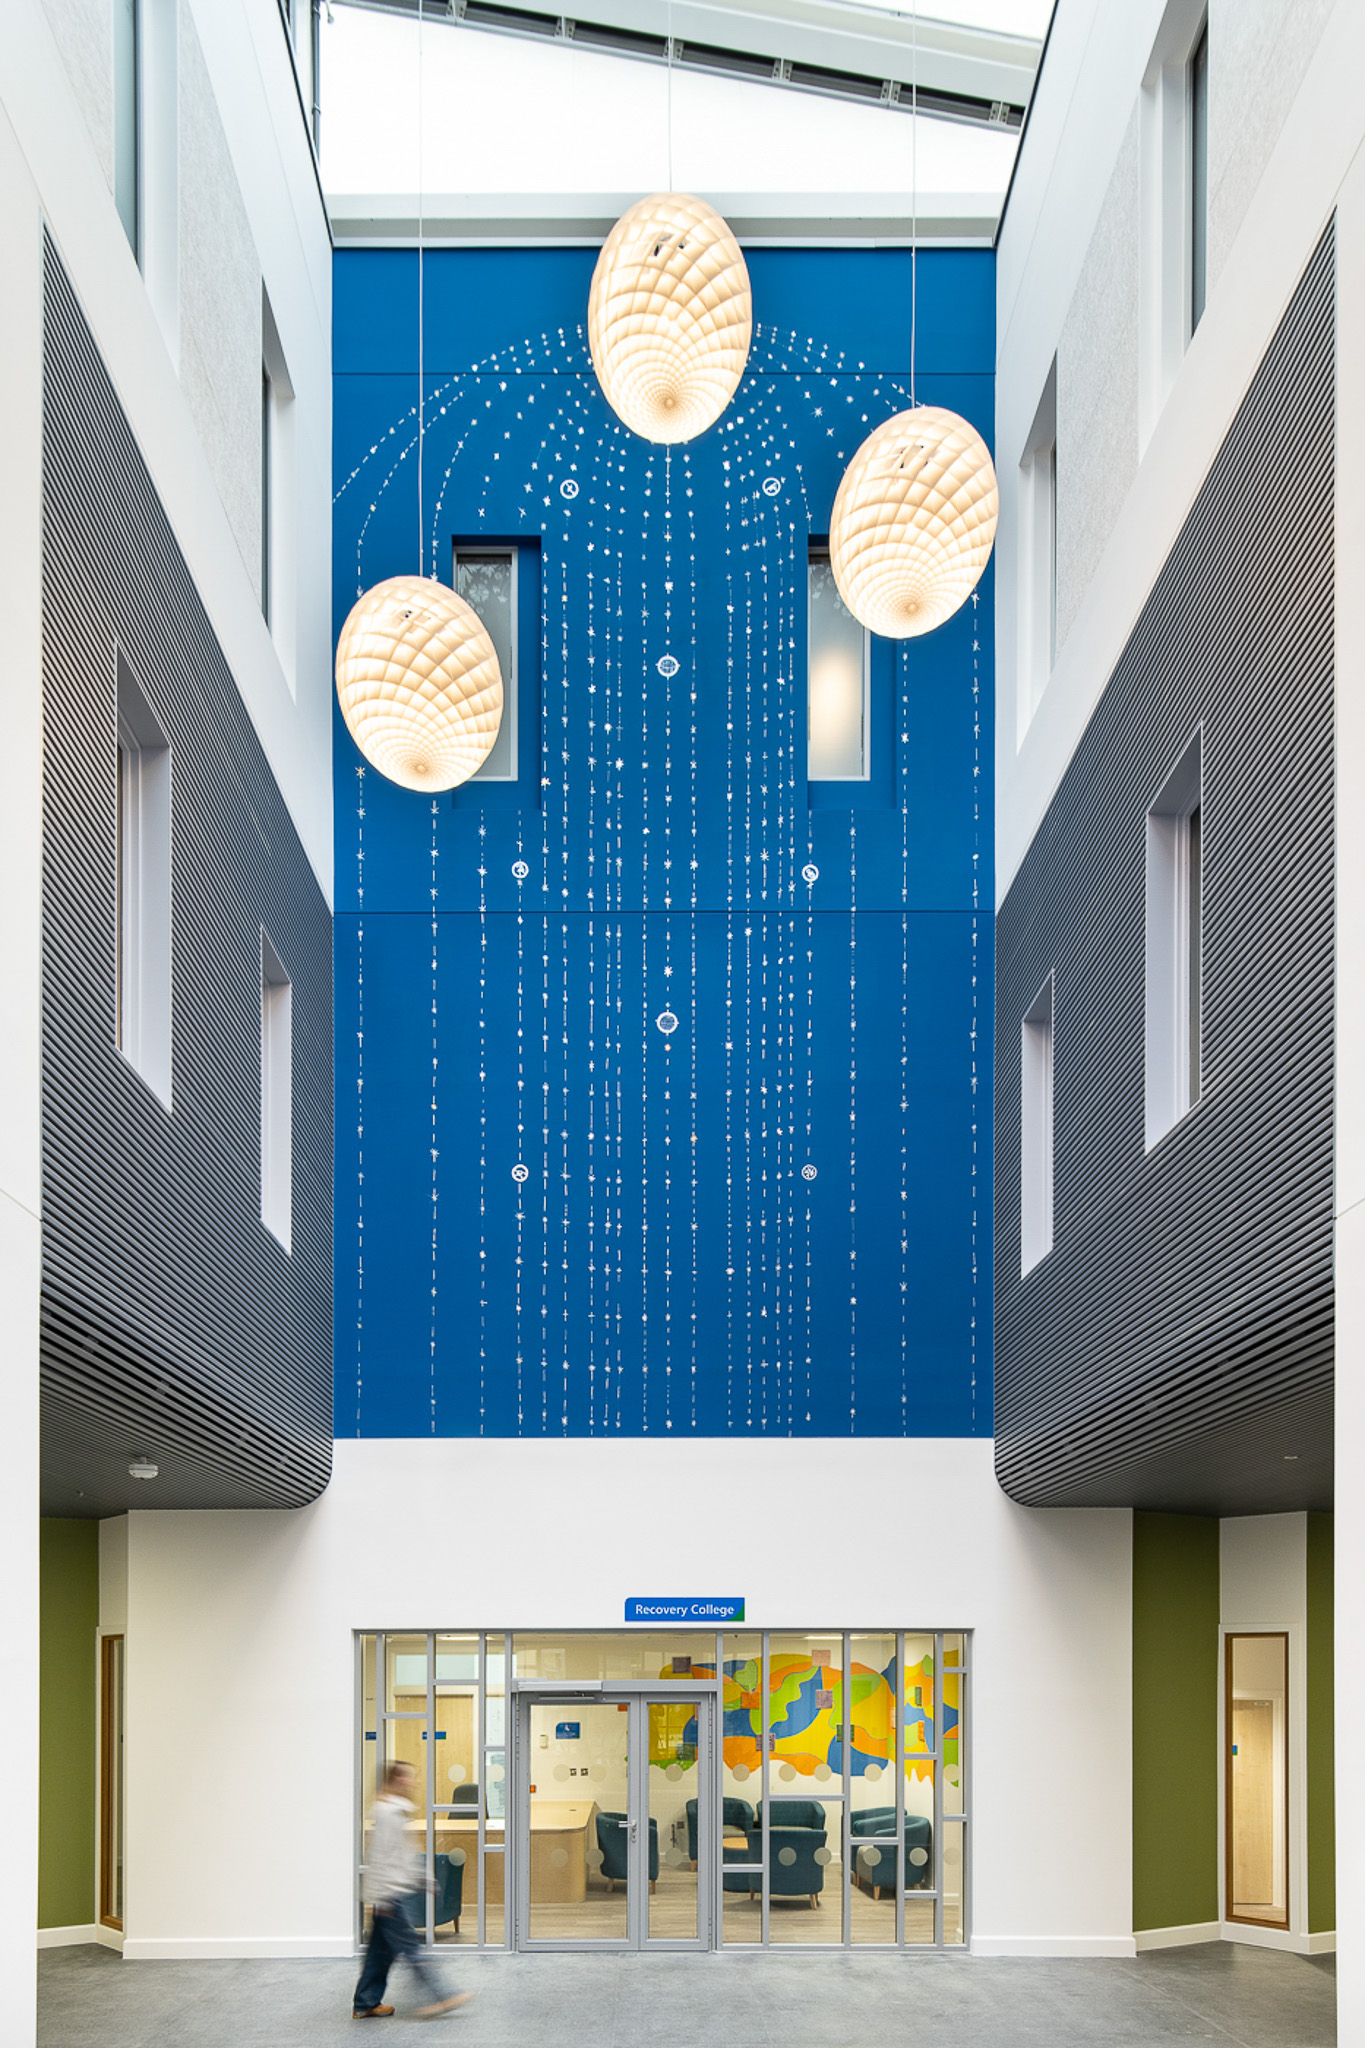 The Wick - Sutapa Biswas, Atrium, Springfield Hospital. Photographer Damian Griffiths. Courtesy of Hospital Rooms LR 4